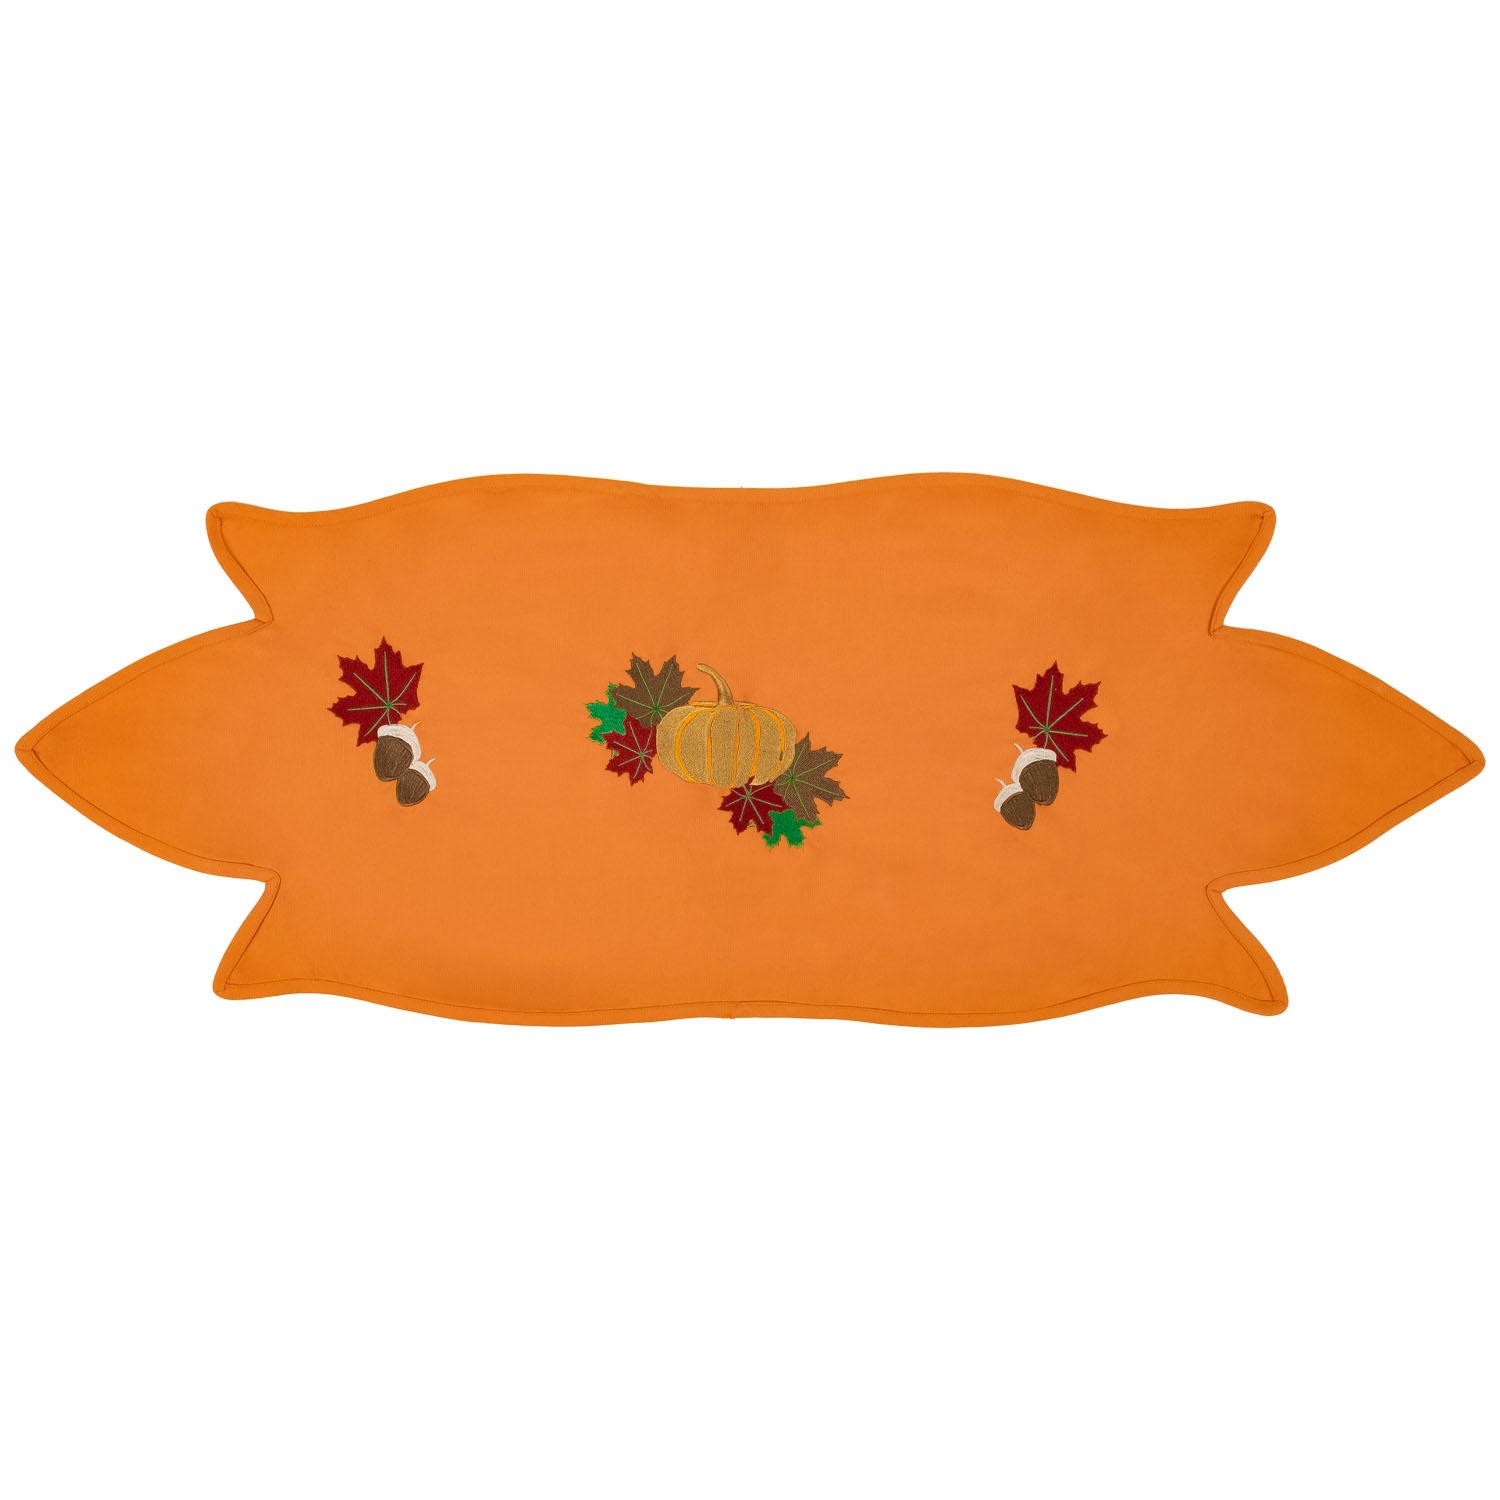 Yellow / Orange Pumpkin Embroidery Cotton Runner One Size Km Home Collection